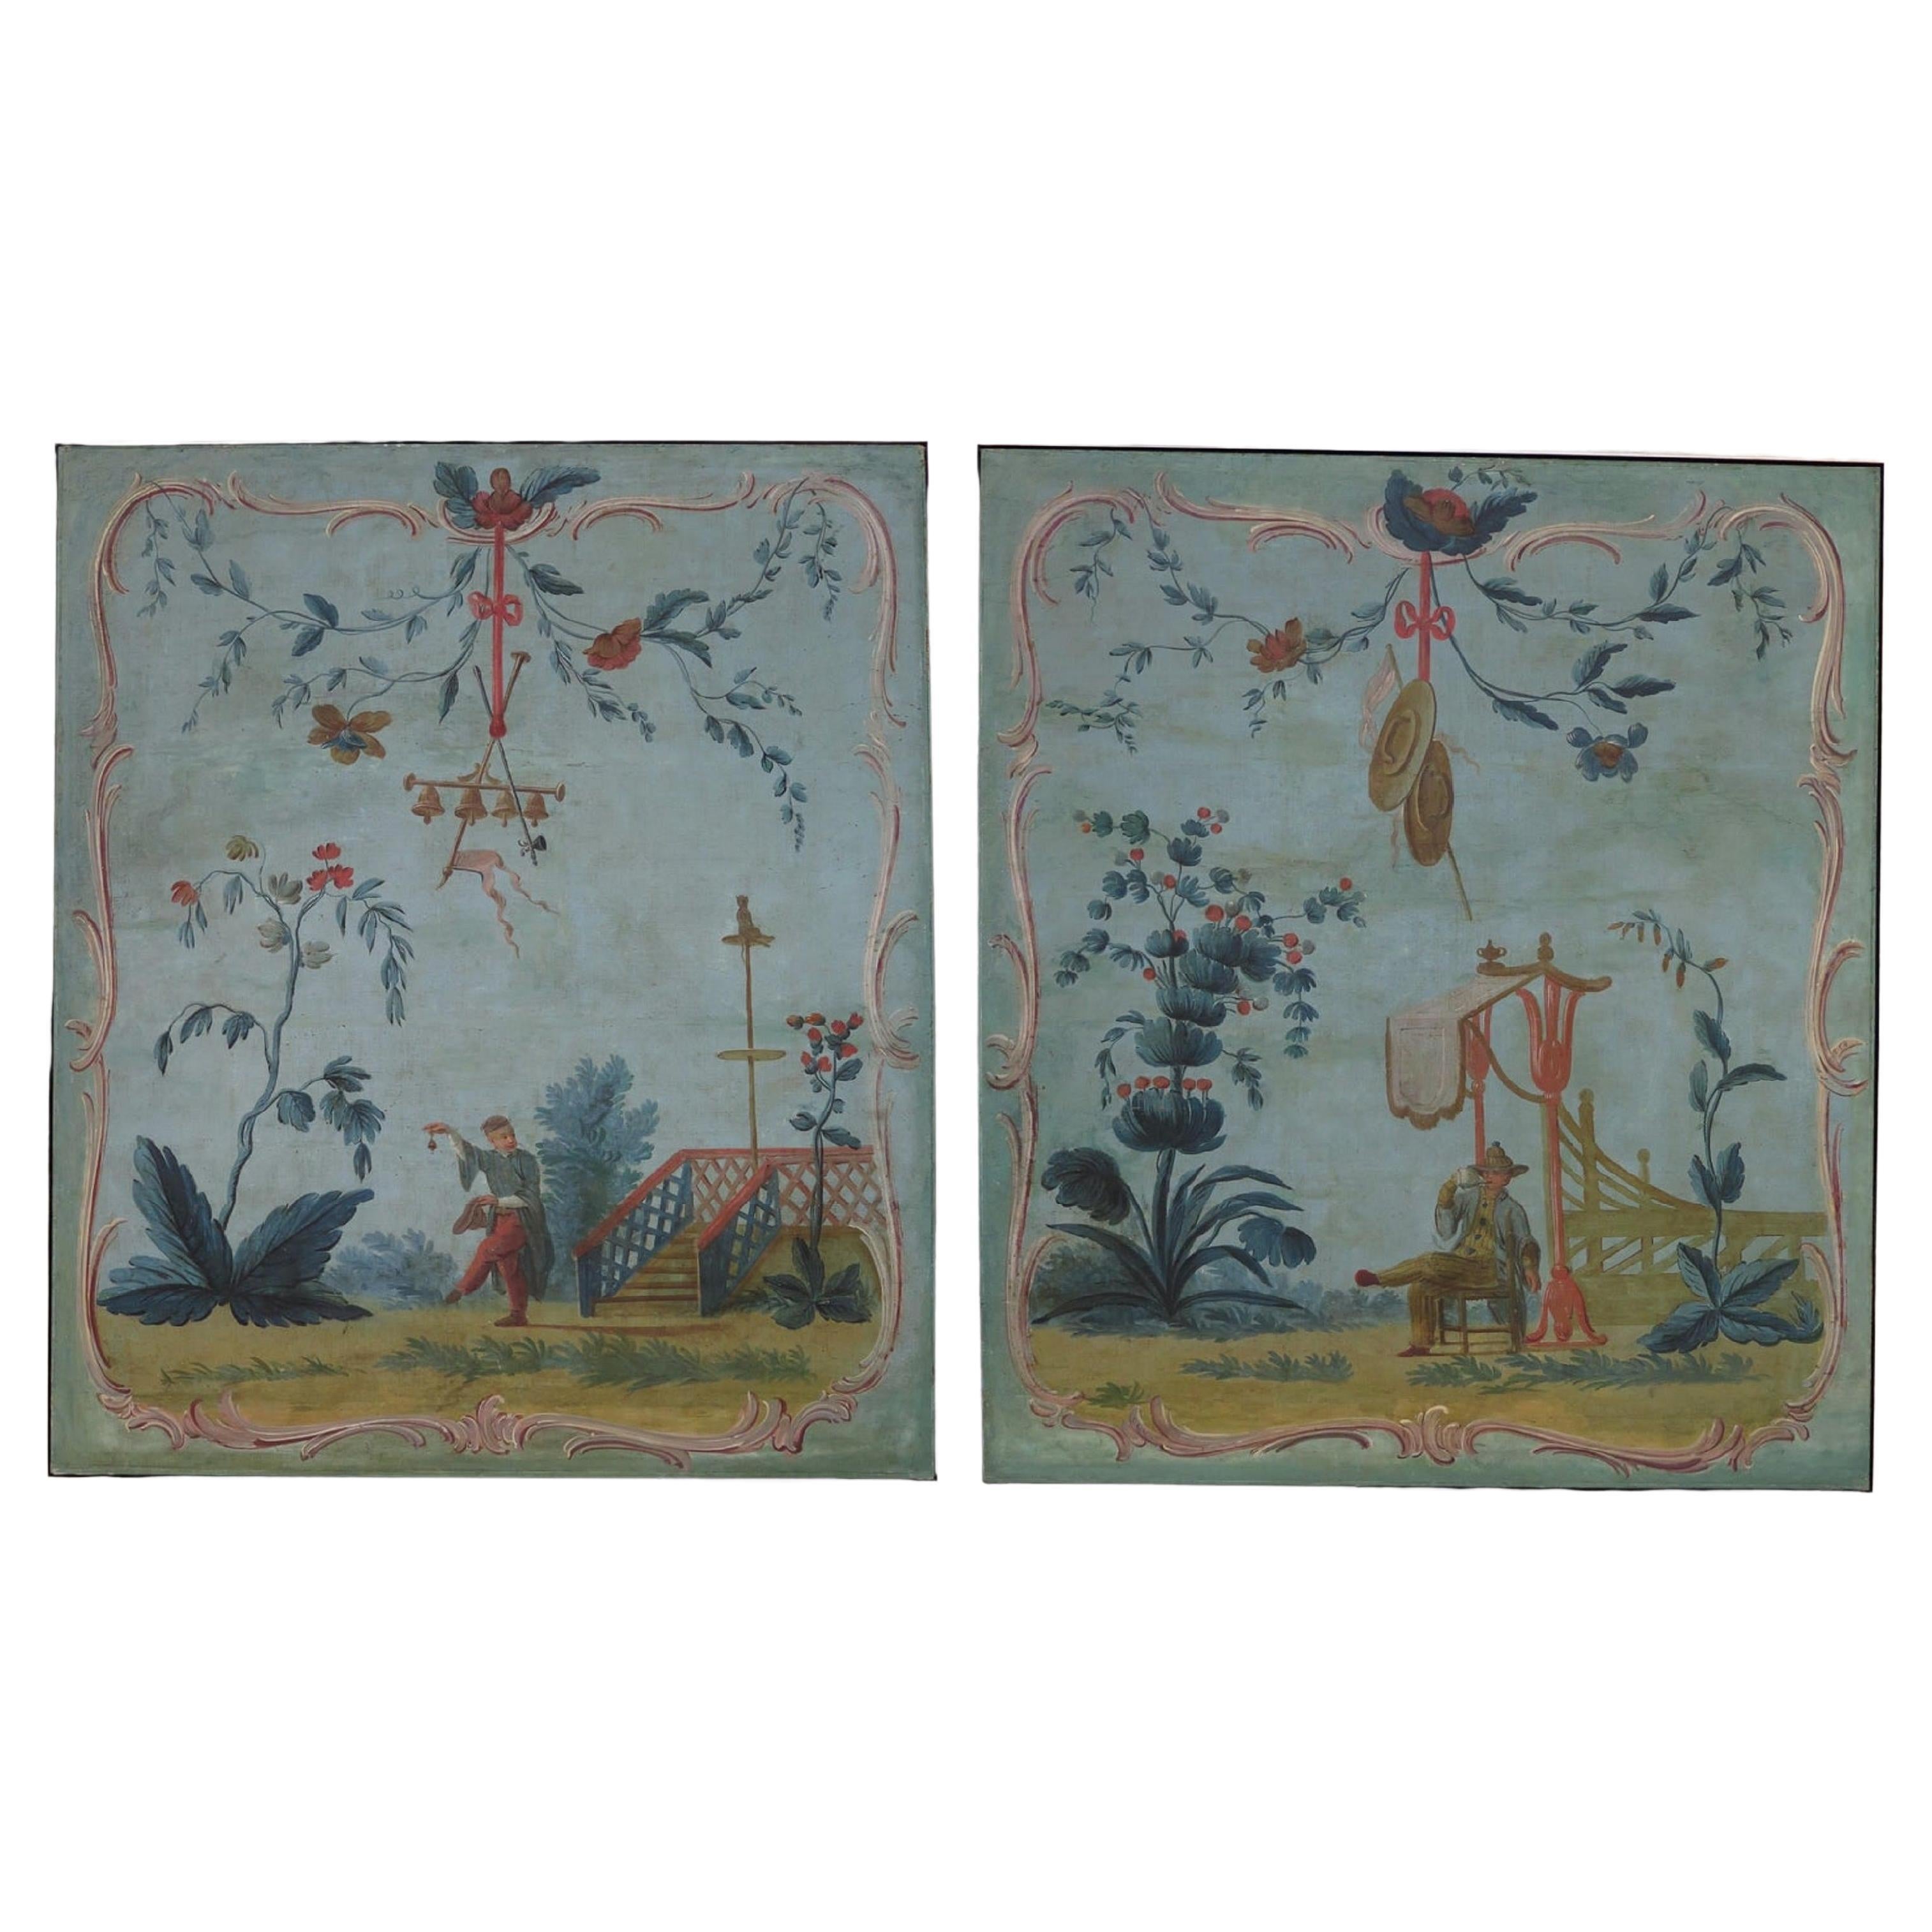 Set of two (2) Louis XV painted canvas panels once set in boiserie. Chinoiserie decoration with great colors and beautiful scenes.

Dimensions for the panels:
72.5